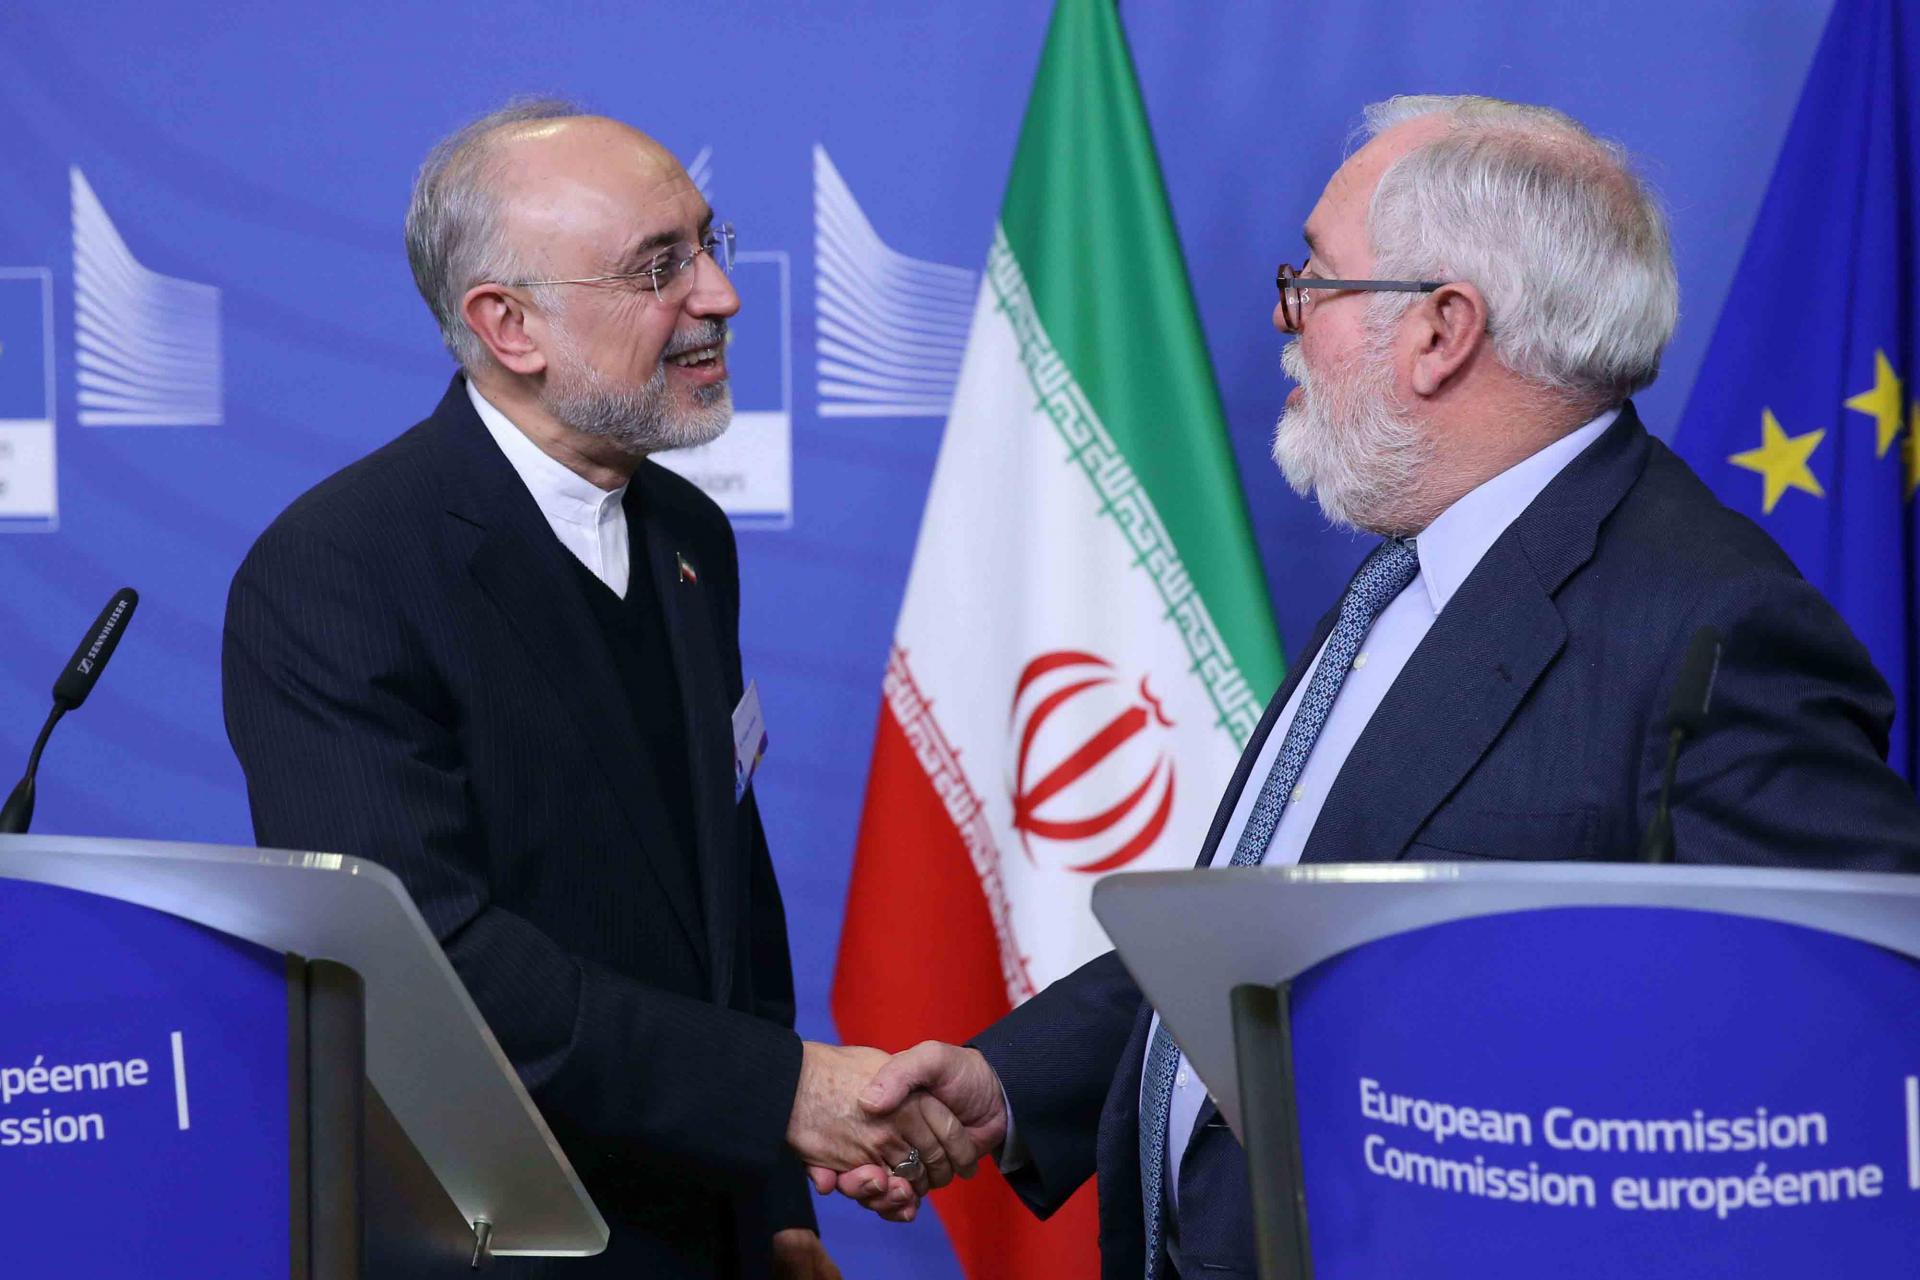 Miguel Arias Canete (R) Commissionner of the European Commission in charge of Climate Action and Energy, and Vice-President of the Islamic Republic of Iran and Head of the Atomic Energy Organisation of Iran (AEOI) Ali Akbar Salehi